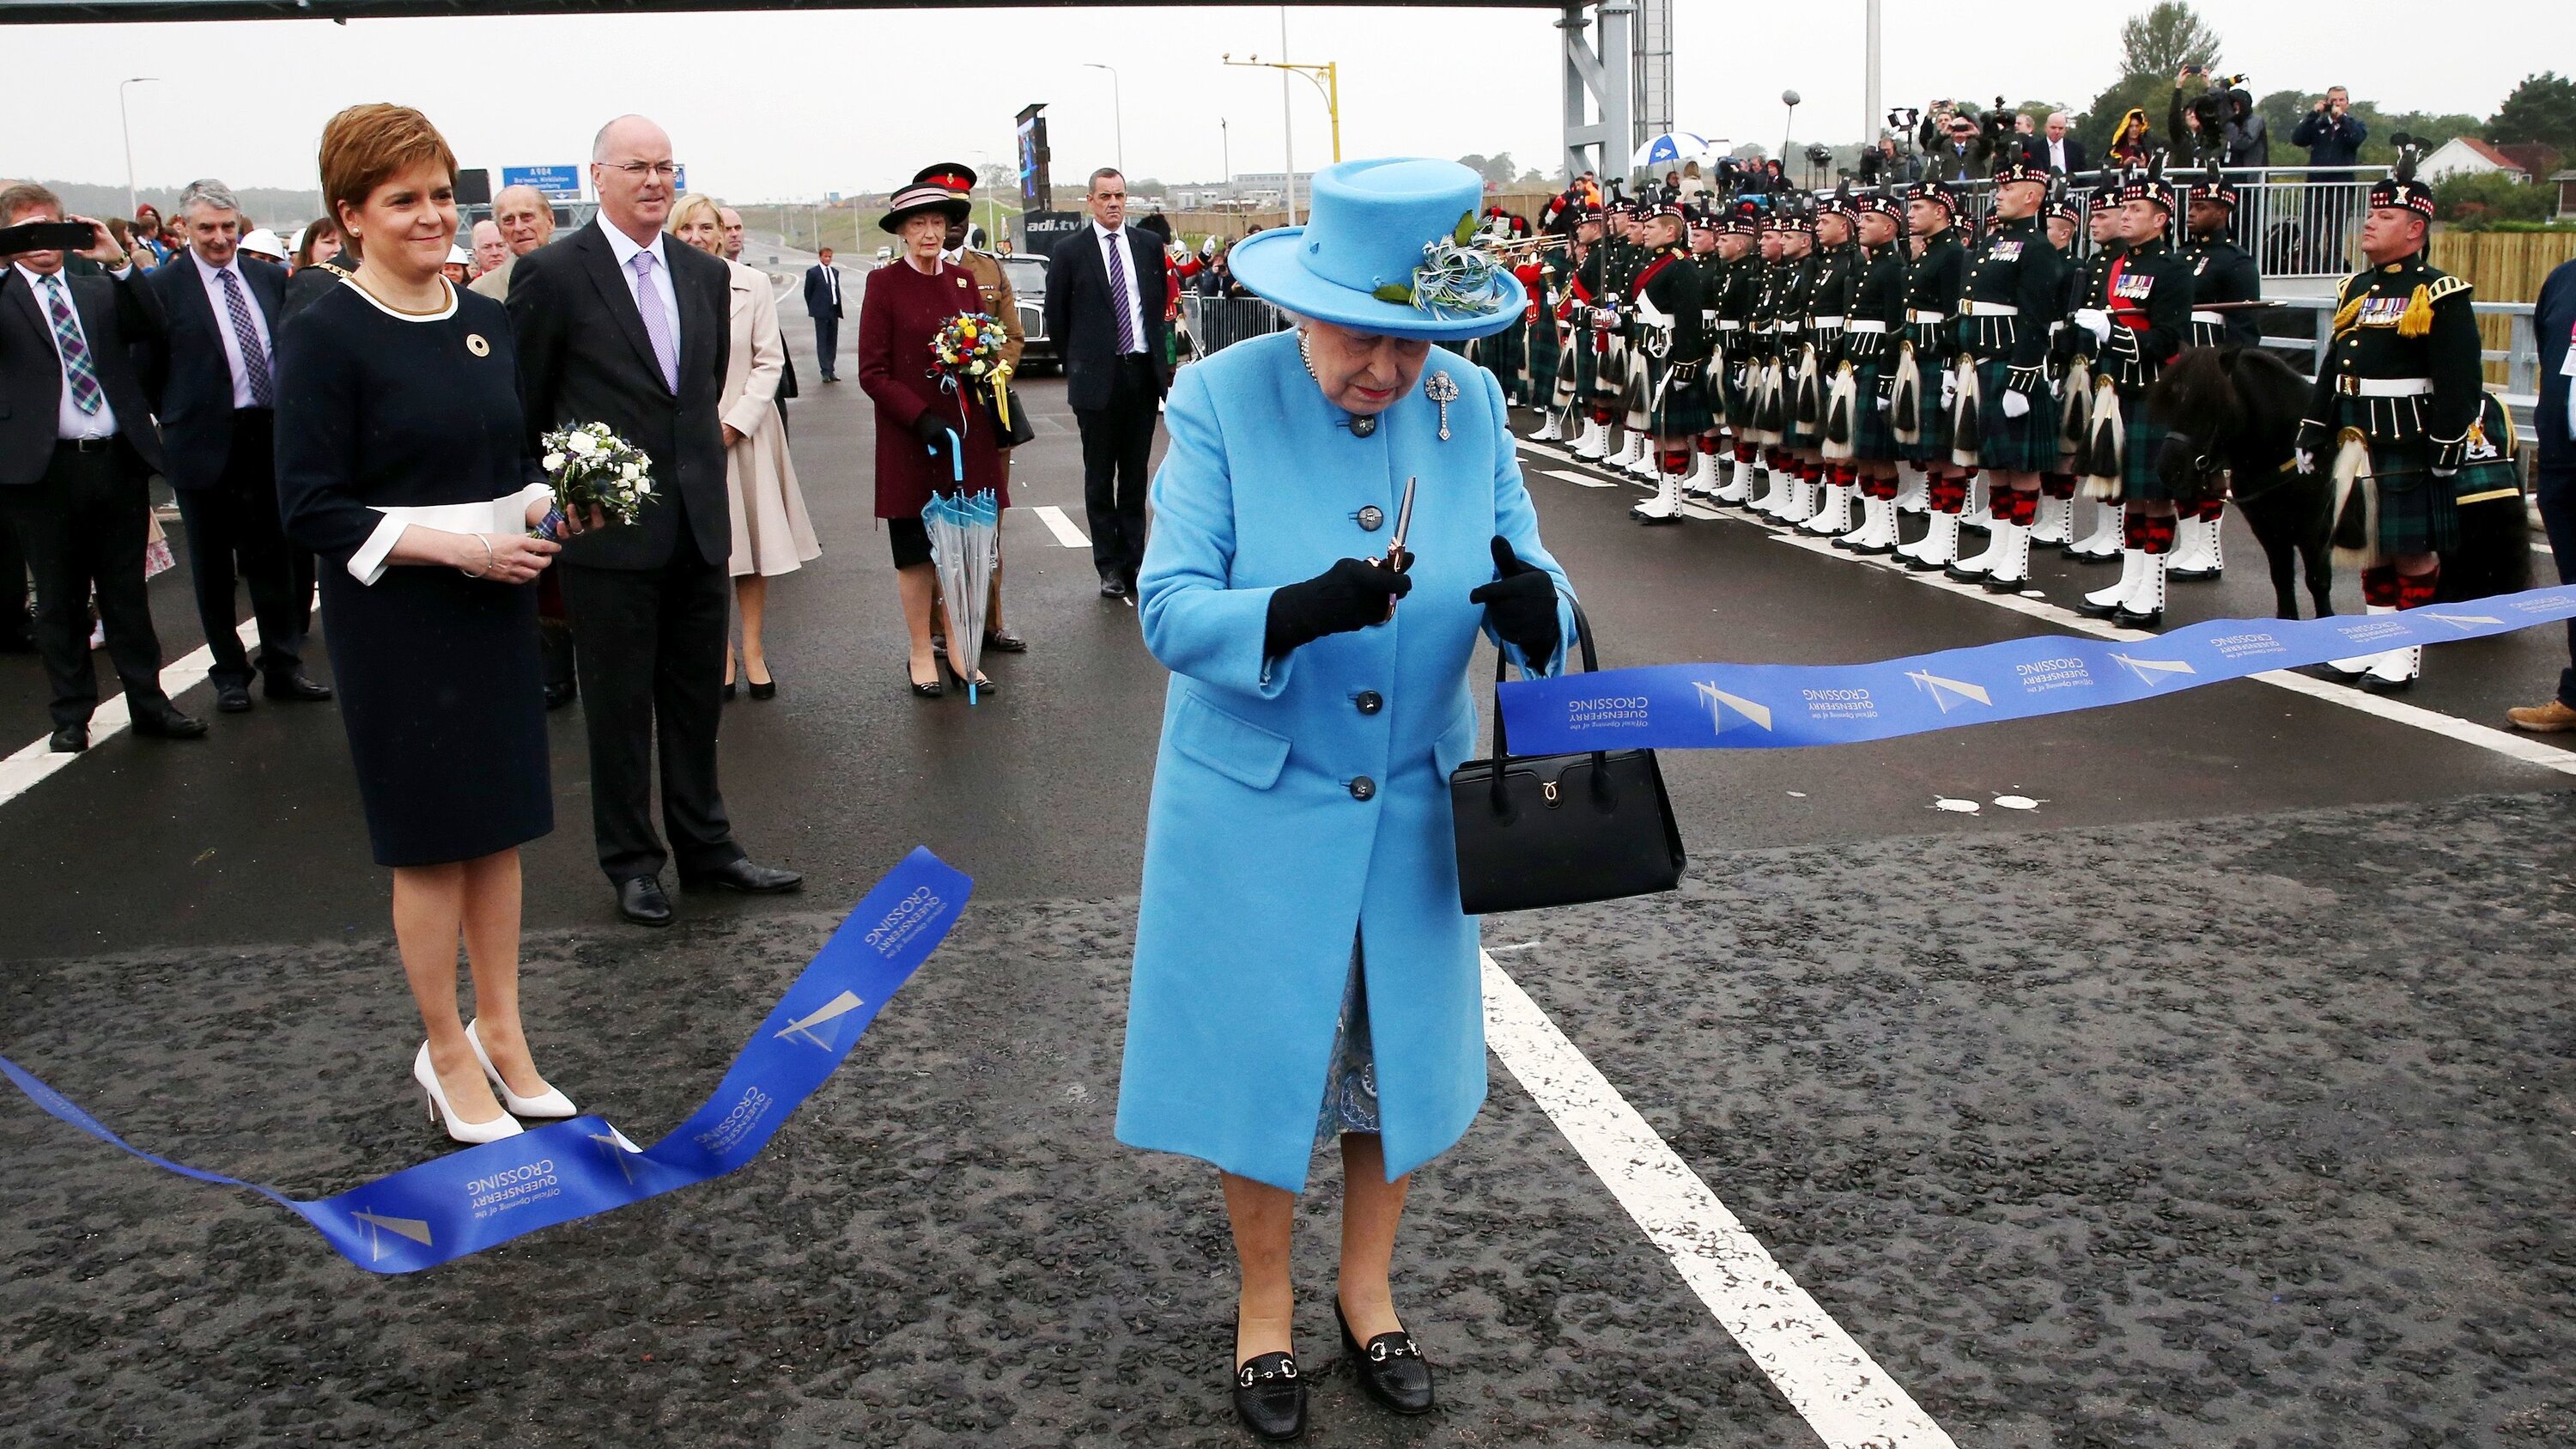 Queen Elizabeth II cuts the ribbon during the 2017 opening ceremony for the Queensferry Crossing.